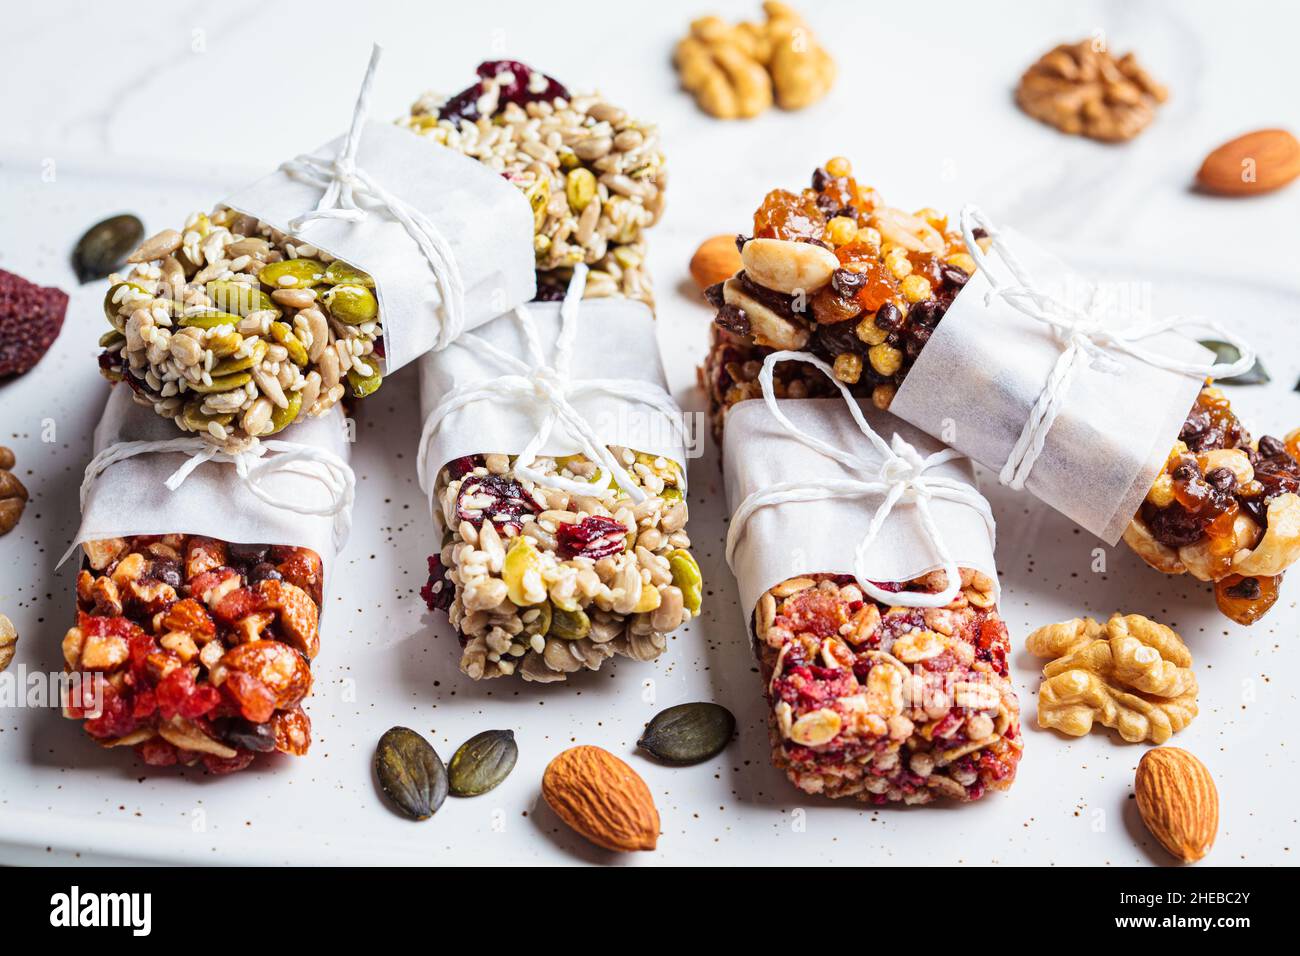 Energy granola bars with different seeds, nuts and dried fruits and berries on a white marble background. Healthy snack concept. Stock Photo